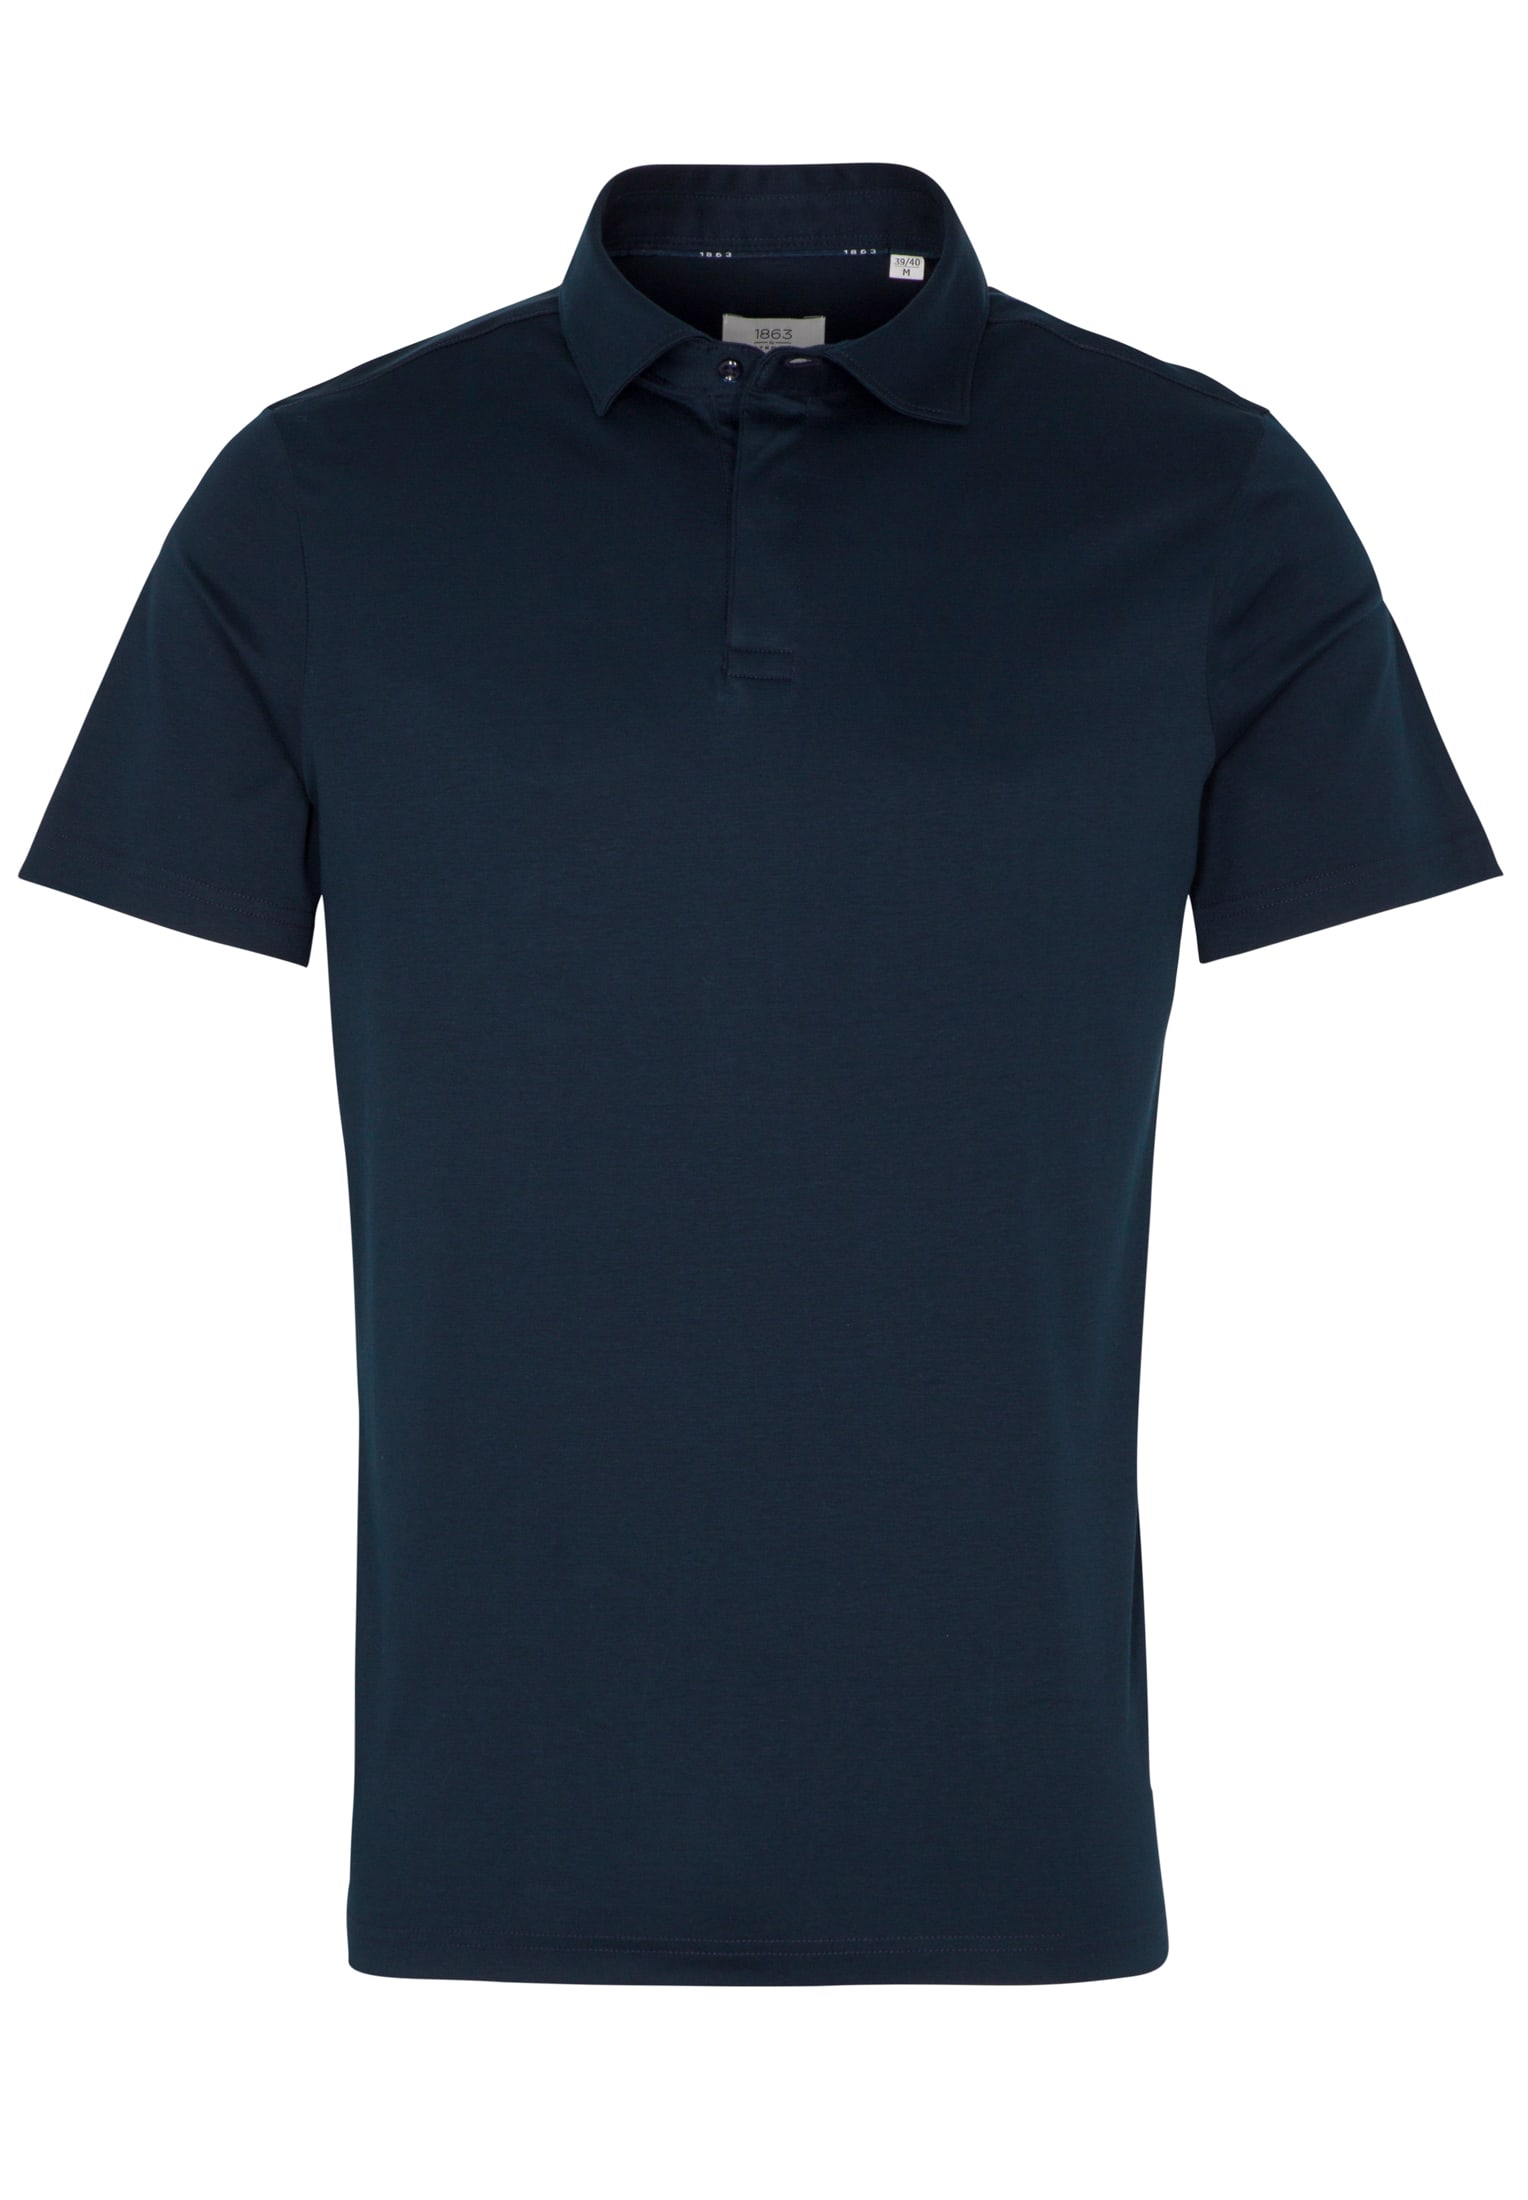 ETERNA Soft Tailoring Polo Shirt SLIM FIT